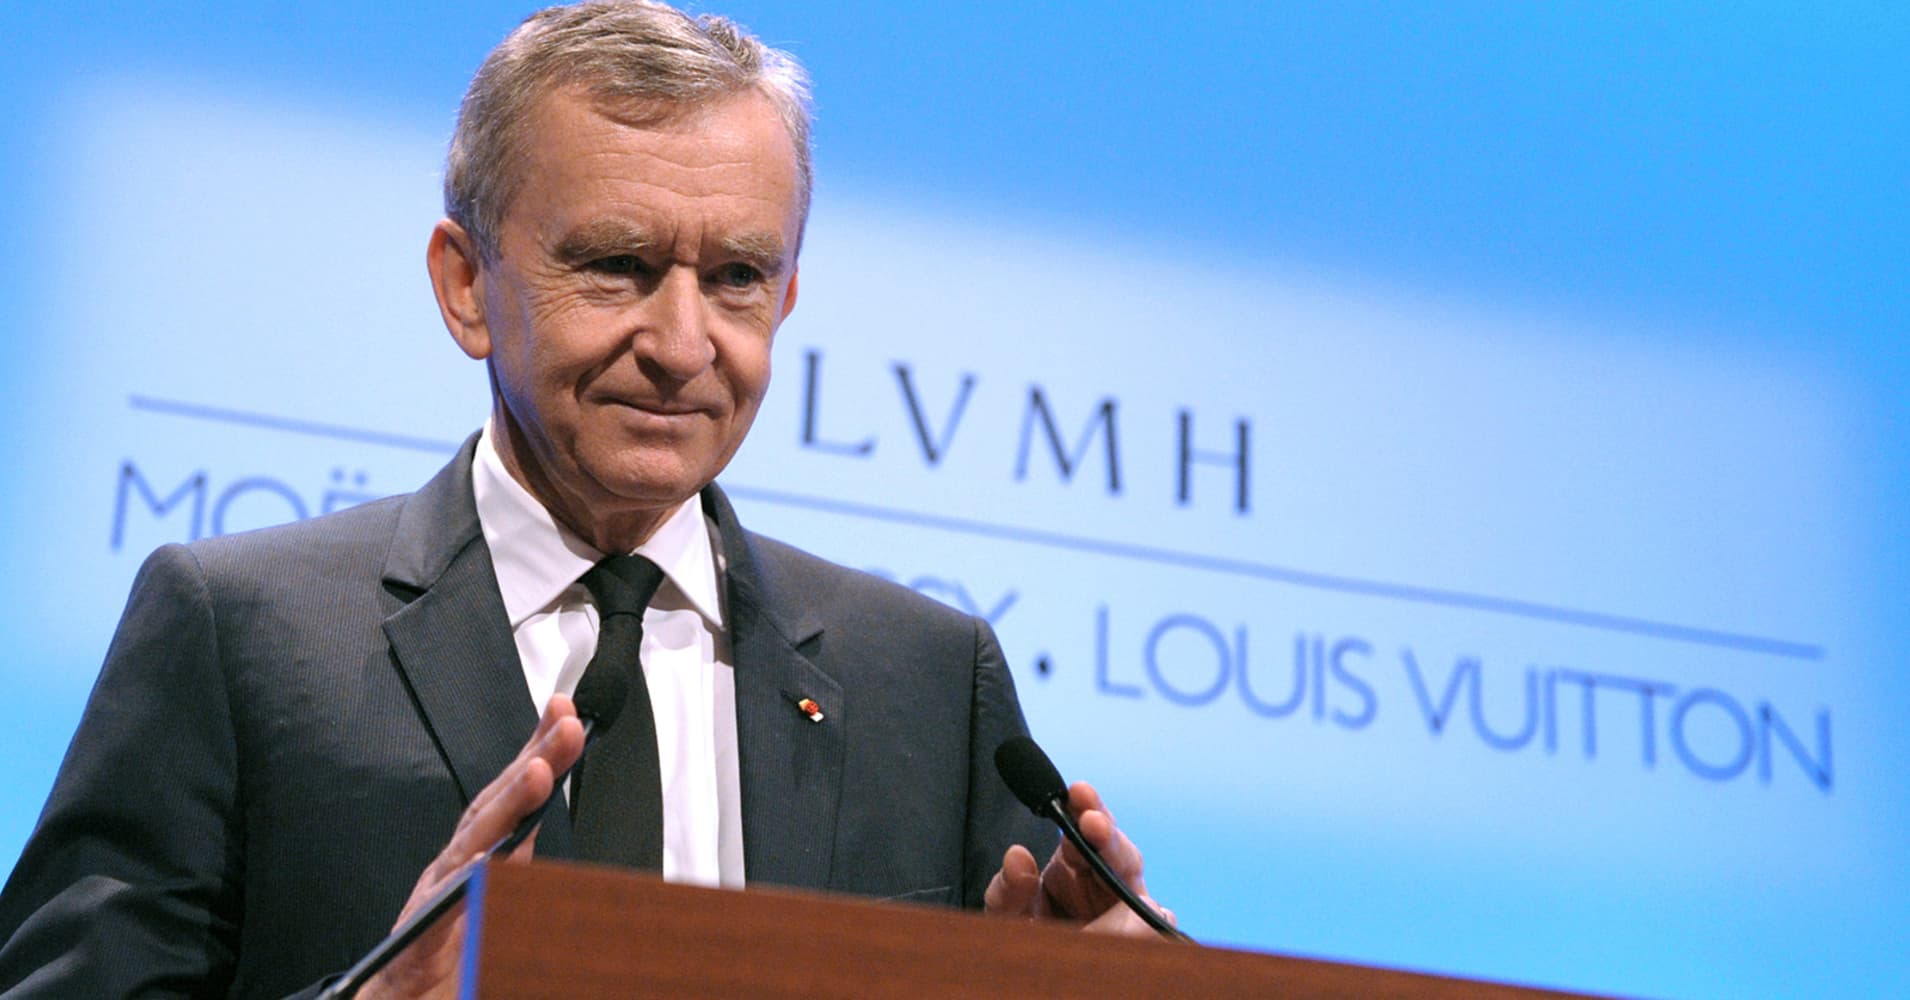 LVMH CEO Arnault says 'we have to be wary of bubbles' with the